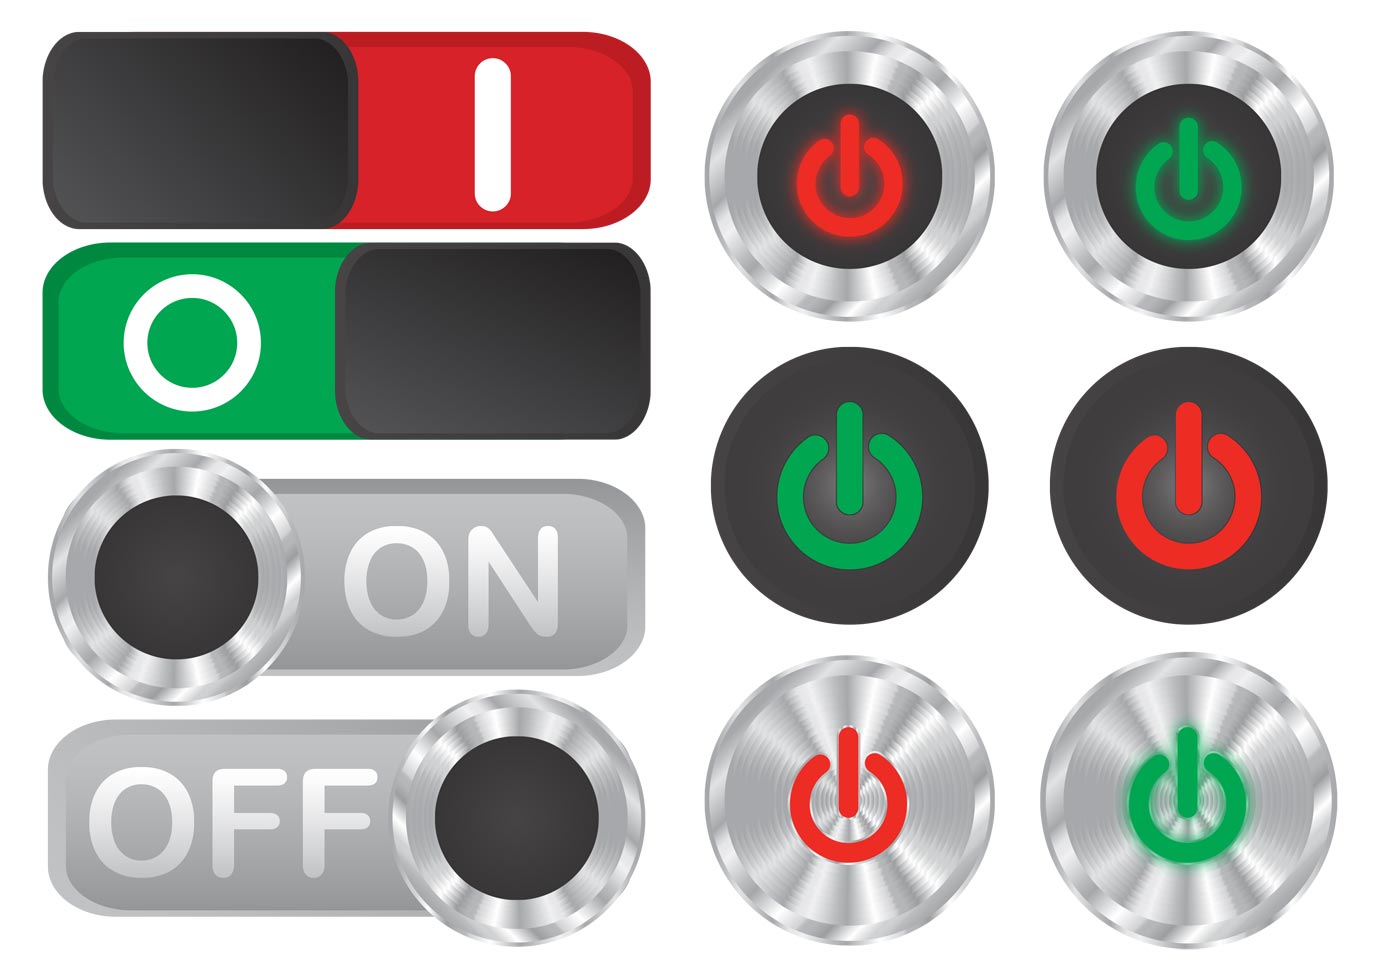 On Off Button Vectors - Download Free Vector Art, Stock Graphics & Images